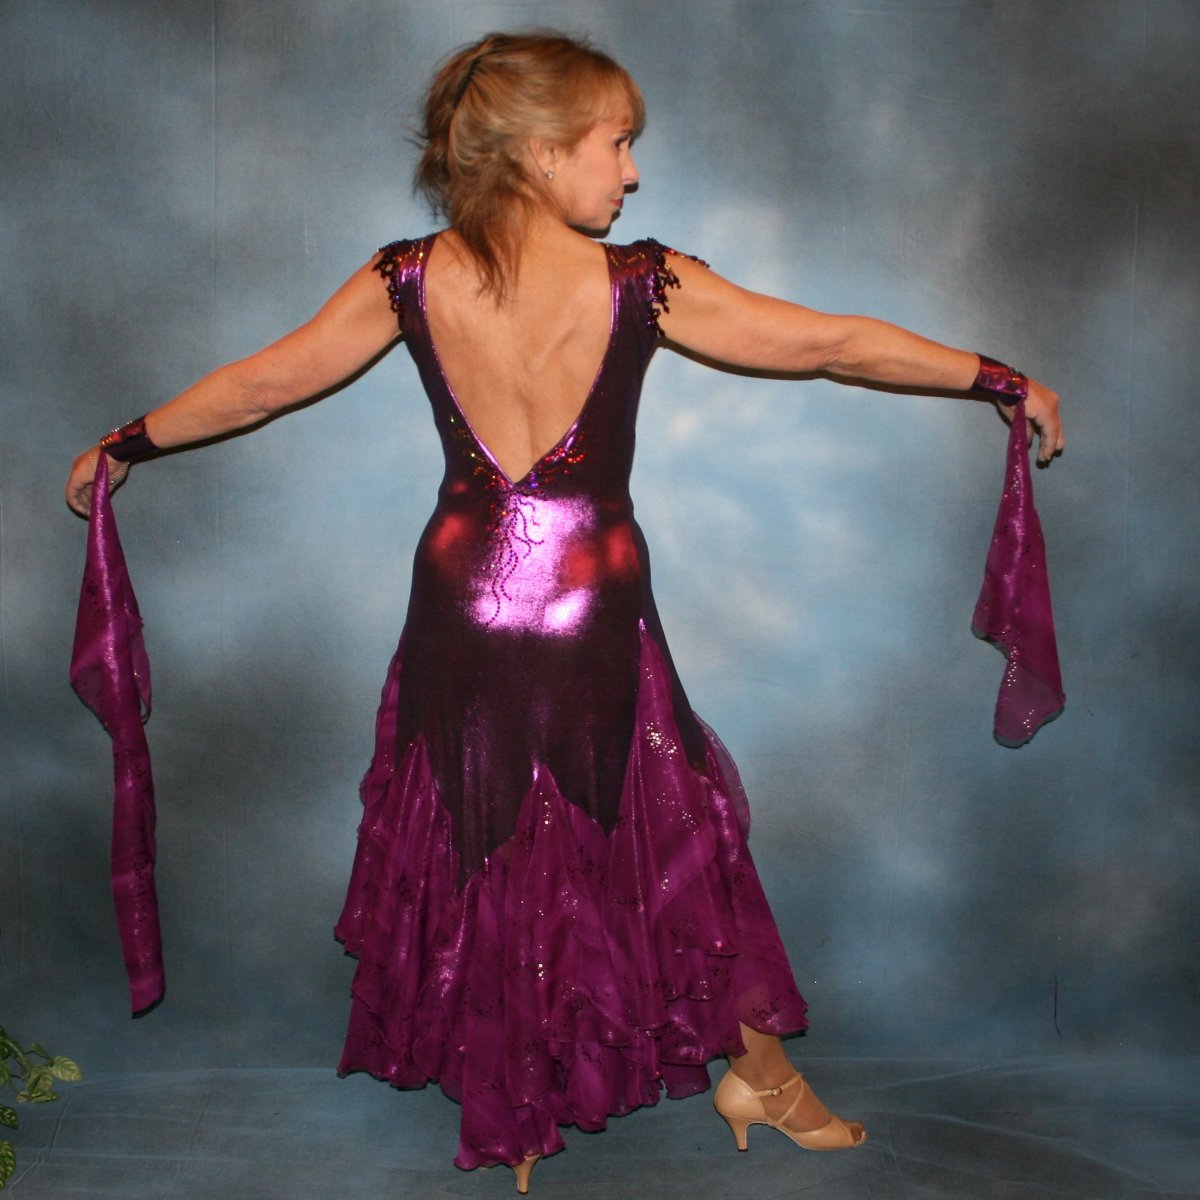 Crystal's Creations Purple ballroom dress was created in rich luxurious deep plum metallic slinky with yards & yards of champagne sequined, iridescent chiffon flounces & floats in shades of plum…dripping with crystal volcano Swarovski rhinestone work,